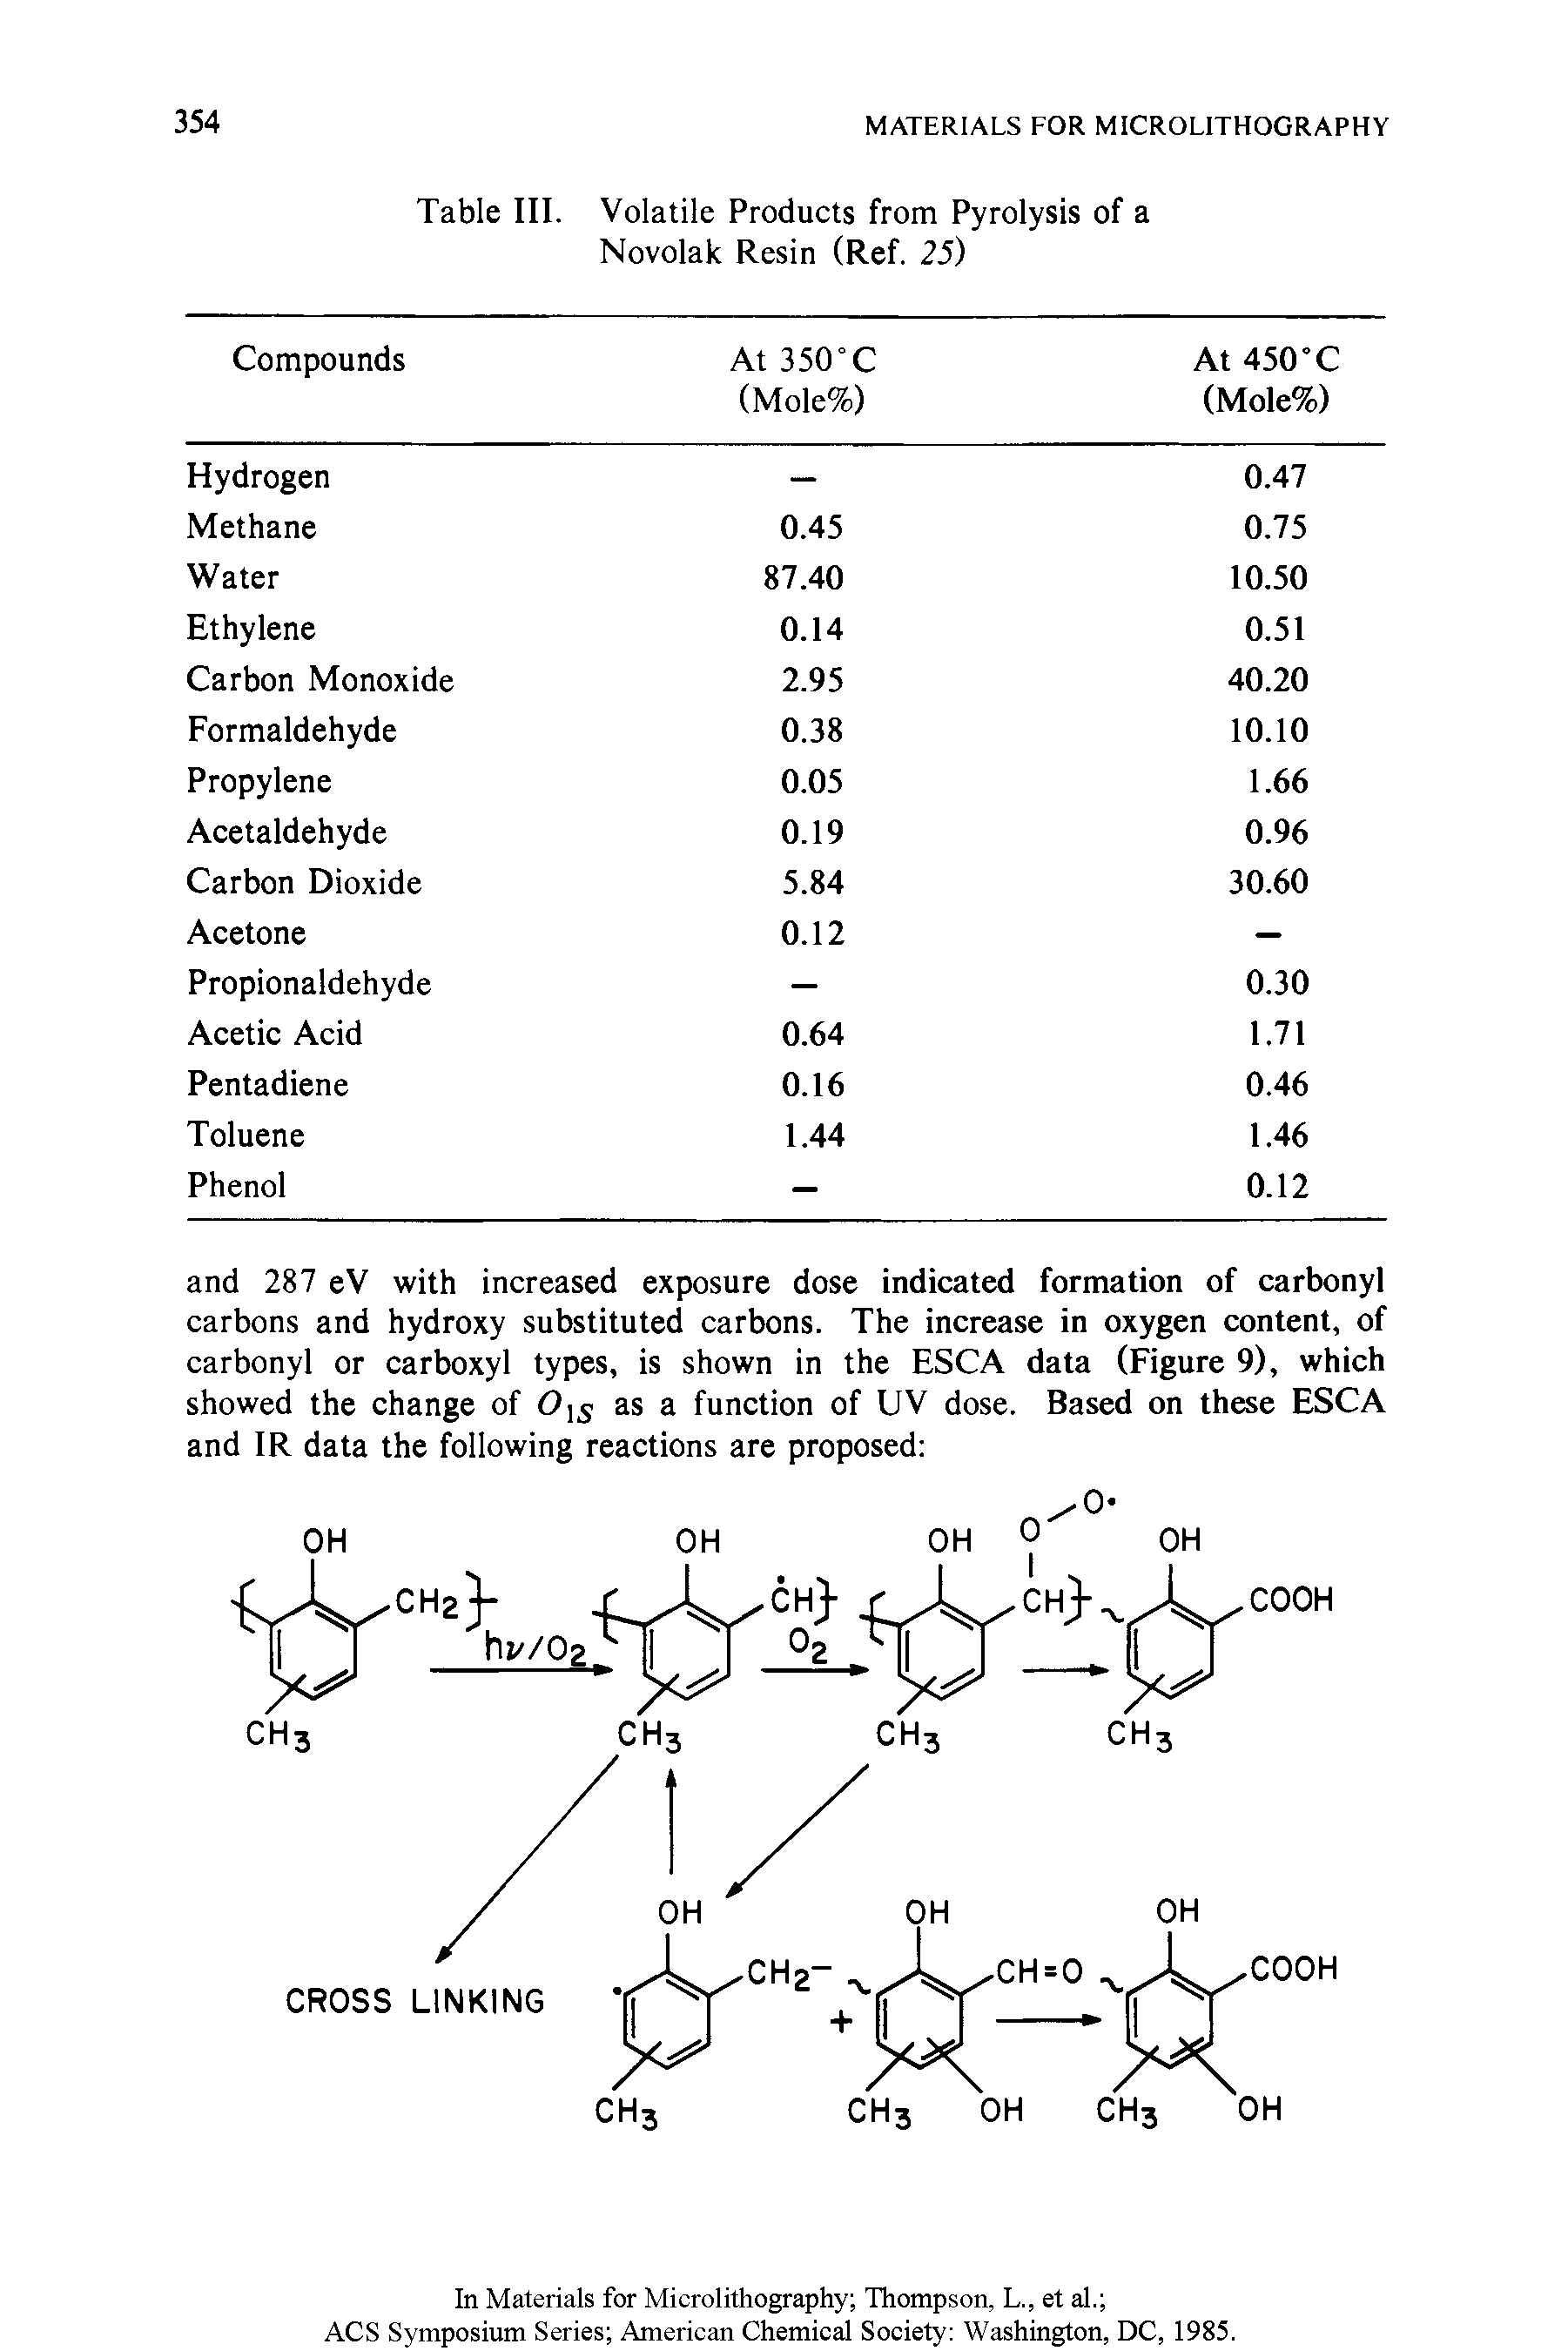 Table III. Volatile Products from Pyrolysis of a Novolak Resin (Ref. 25)...